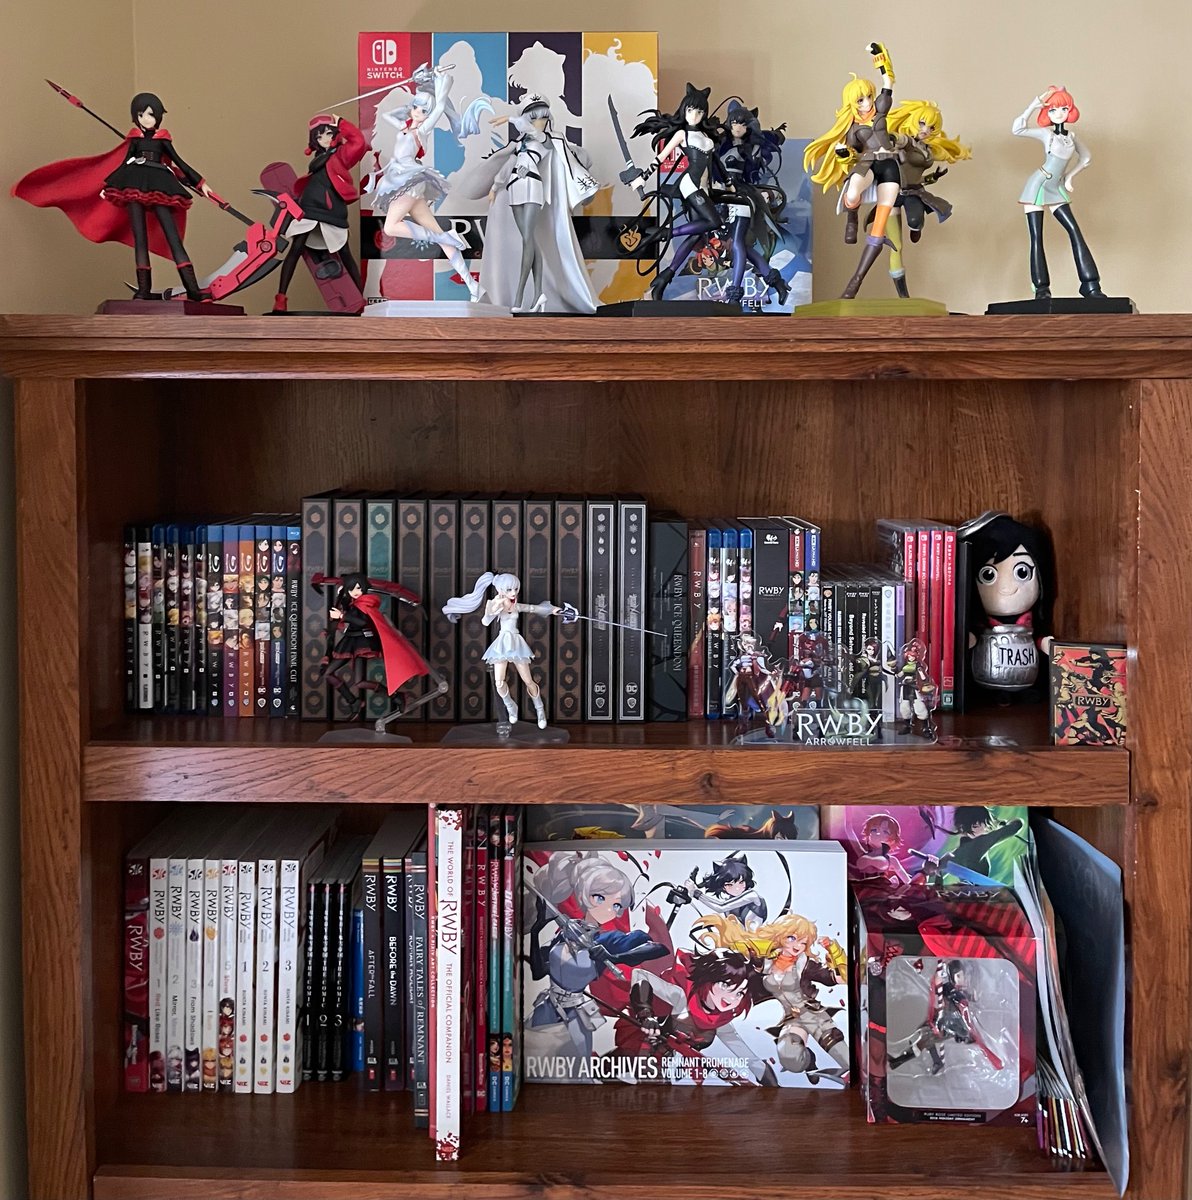 #RWBY

Since I’m now in the process of moving out of my condo, my RWBY collection has followed me back to my temporary home lol